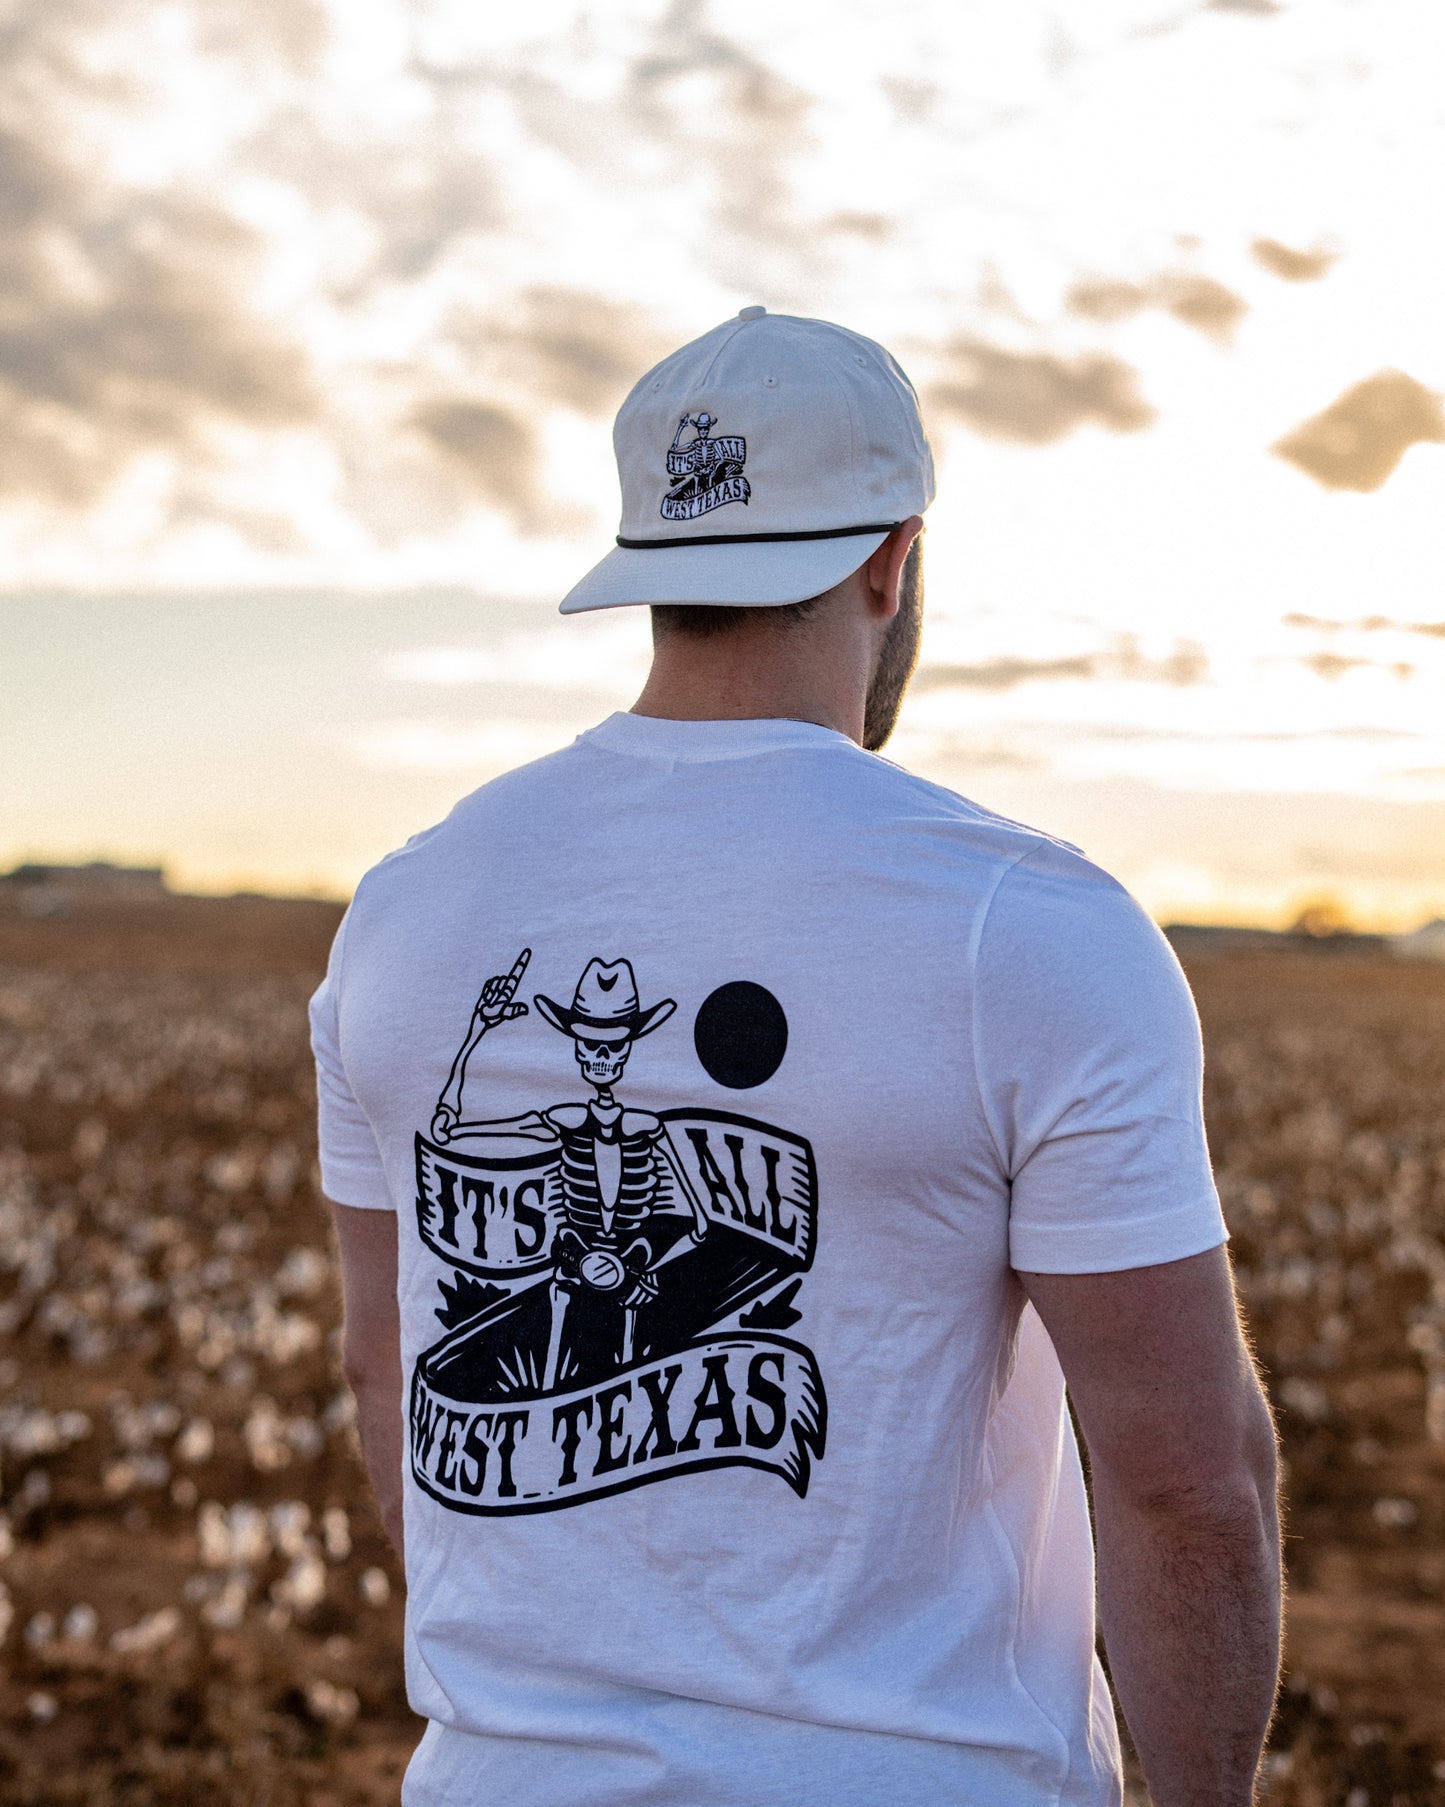 "It's All West Texas" T-Shirt